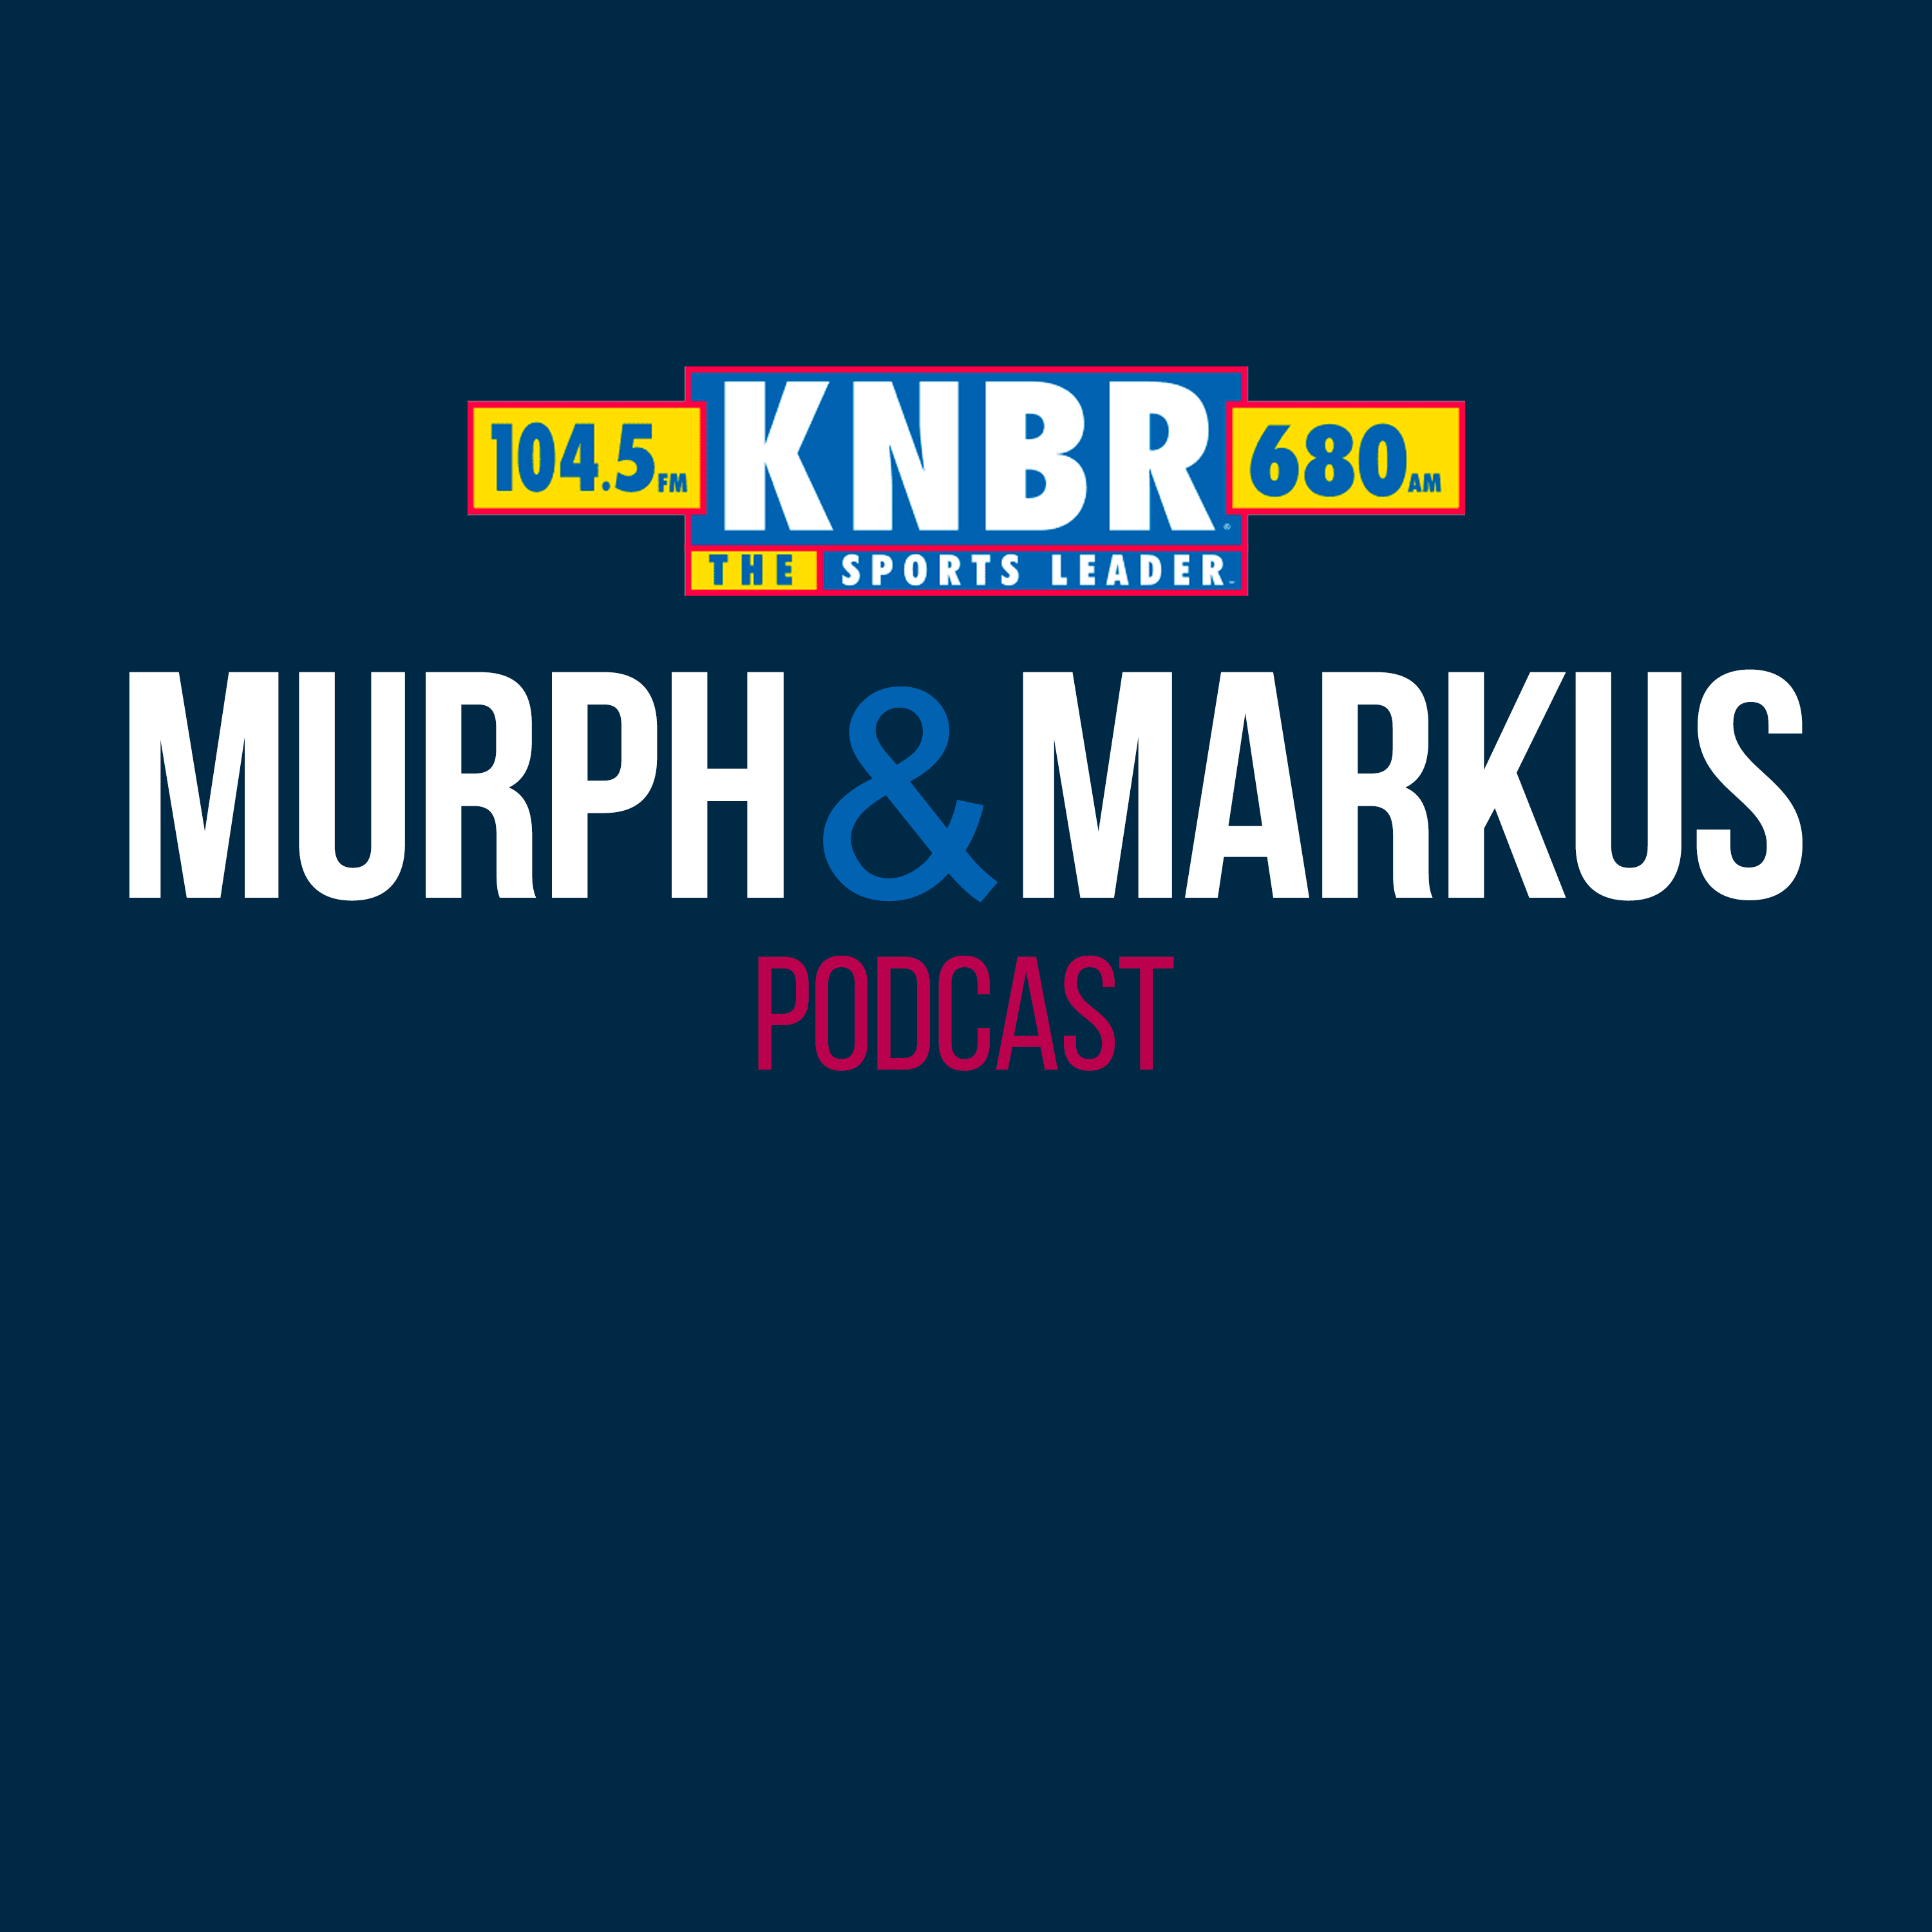 6-26 Hour 2: Murph & Markus debate if the Warriors will re-sign Klay Thompson and/or trade for Paul George, talk to Mike Krukow, and get into today's top story in the Big Hit